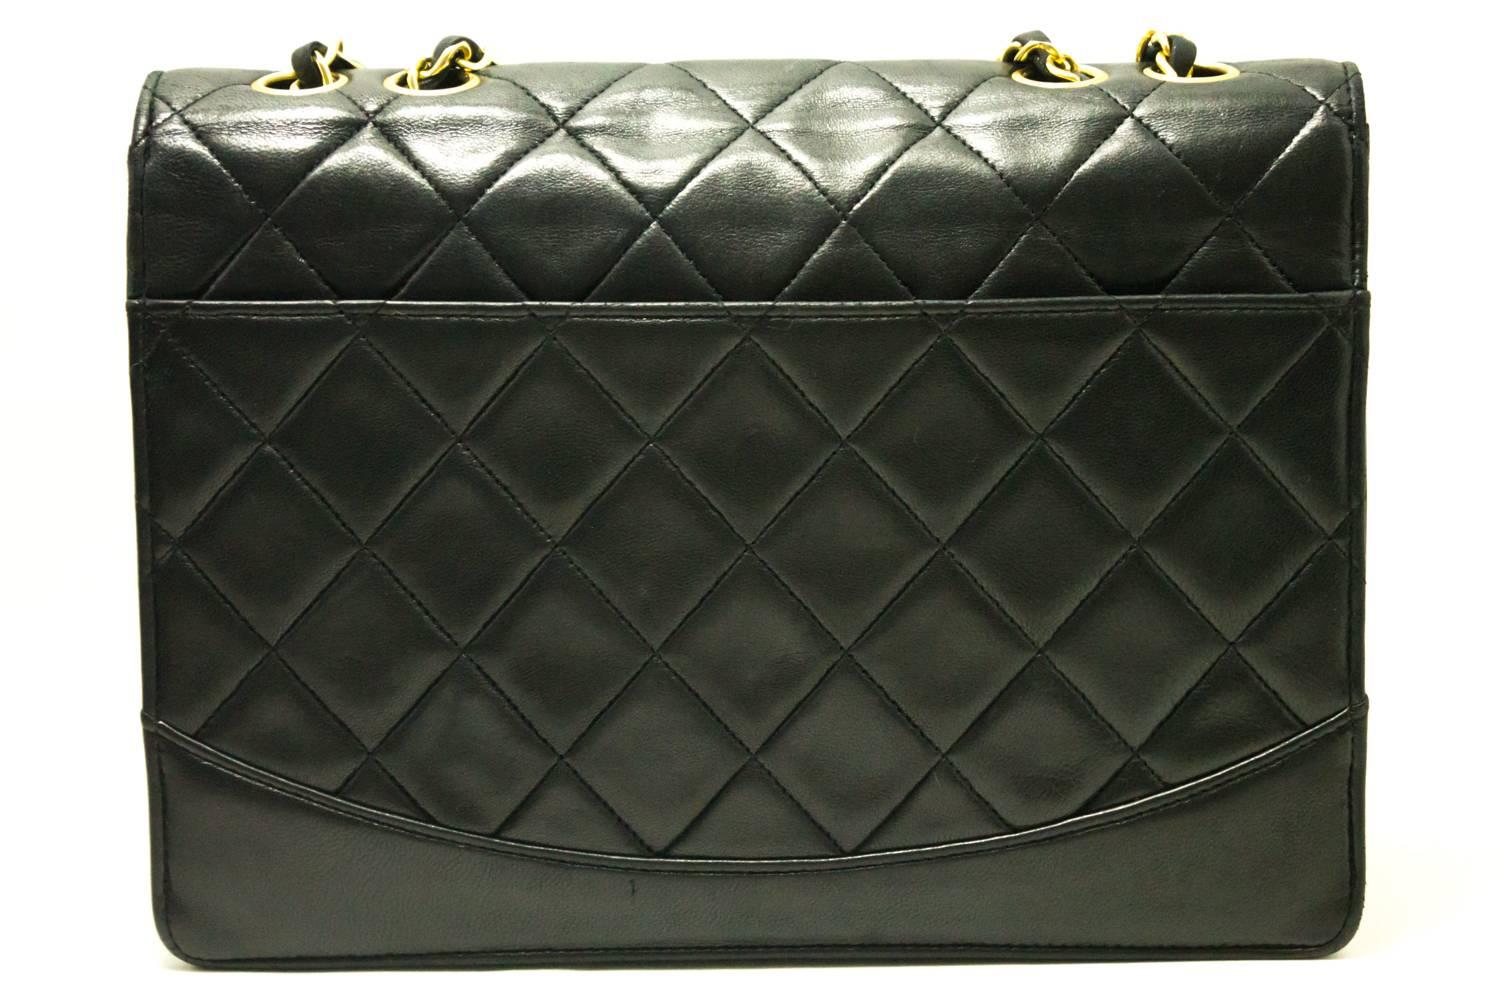 Authentic CHANEL Chain Shoulder Bag Leather Black Single Flap Quilted Lamb 919 6